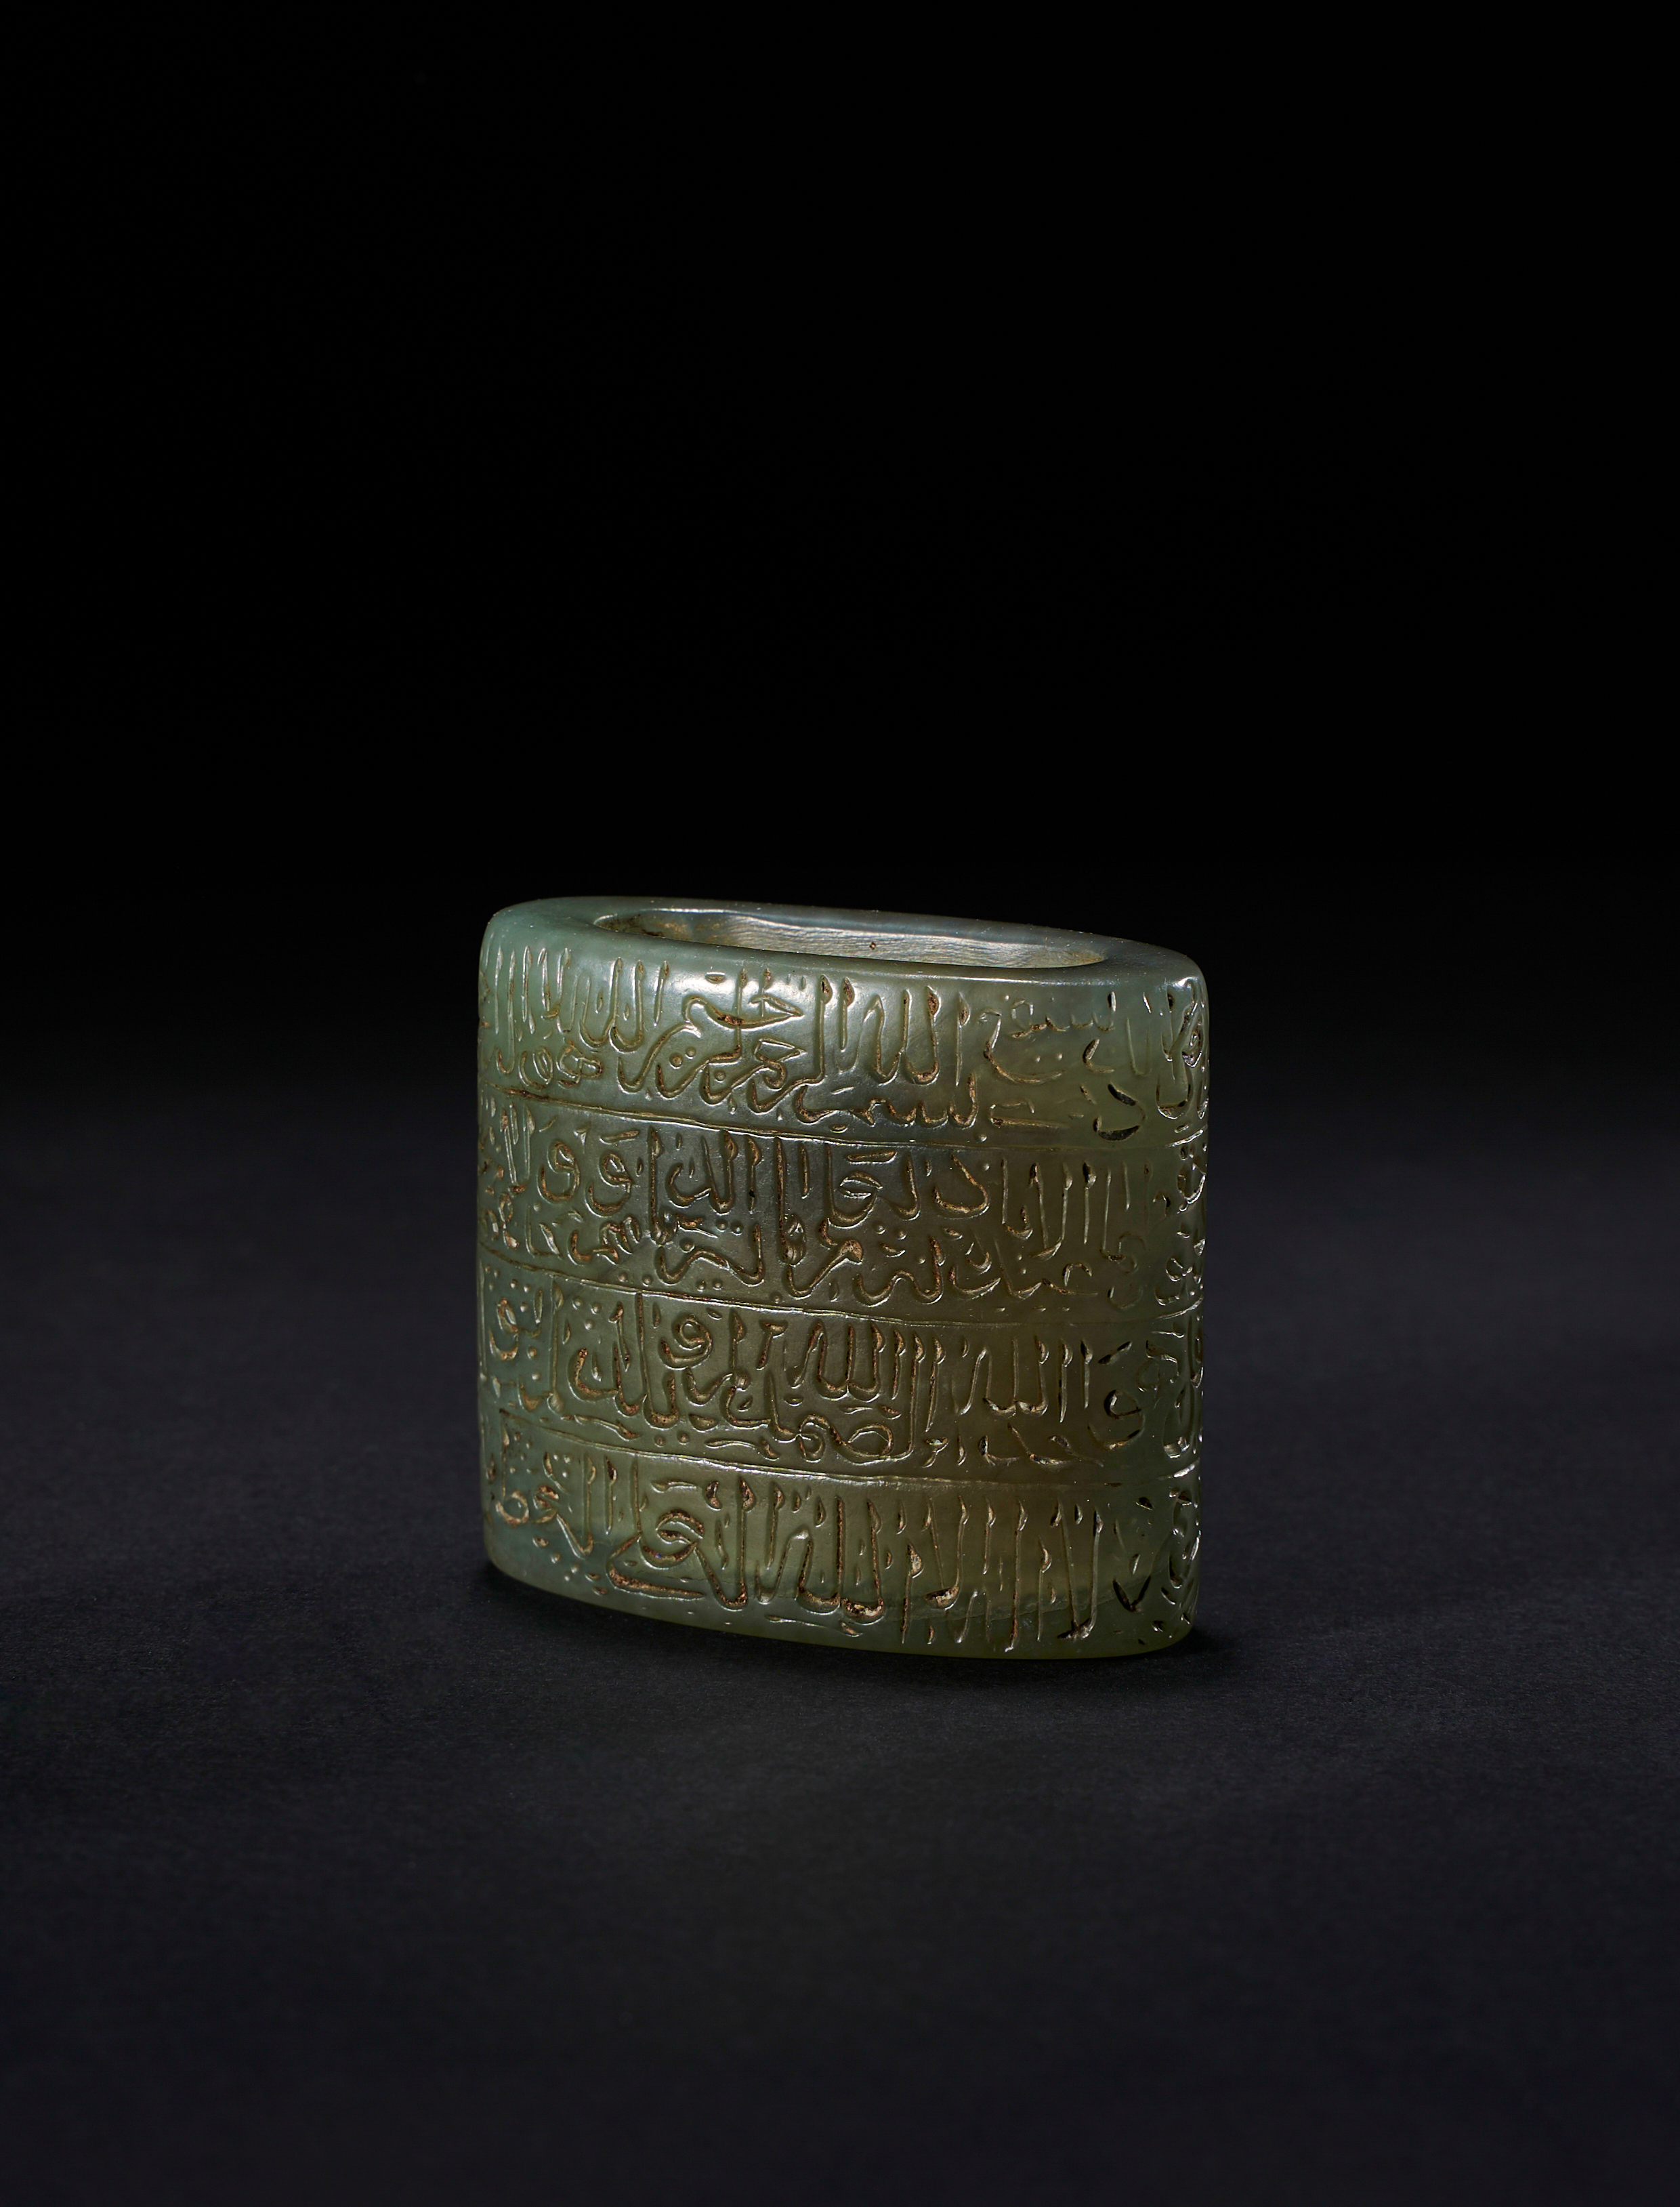 A RARE CALLIGRAPHIC INSCRIBED JADE INKWELL, 18TH CENTURY, MUGHAL, INDIA - Image 2 of 7